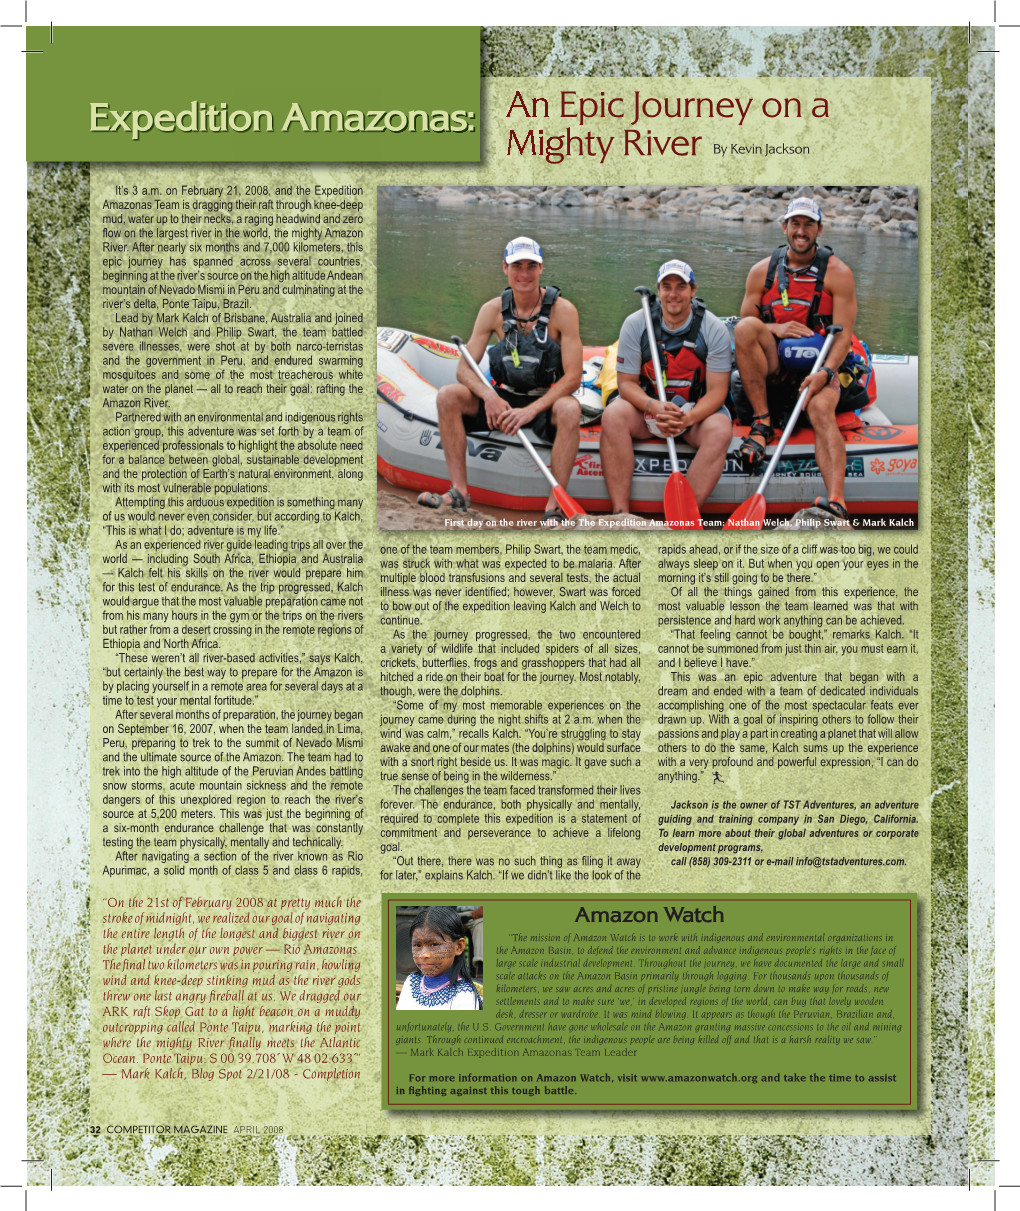 Expedition Amazonas: an Epic Journey on a Mighty River by Kevin Jackson